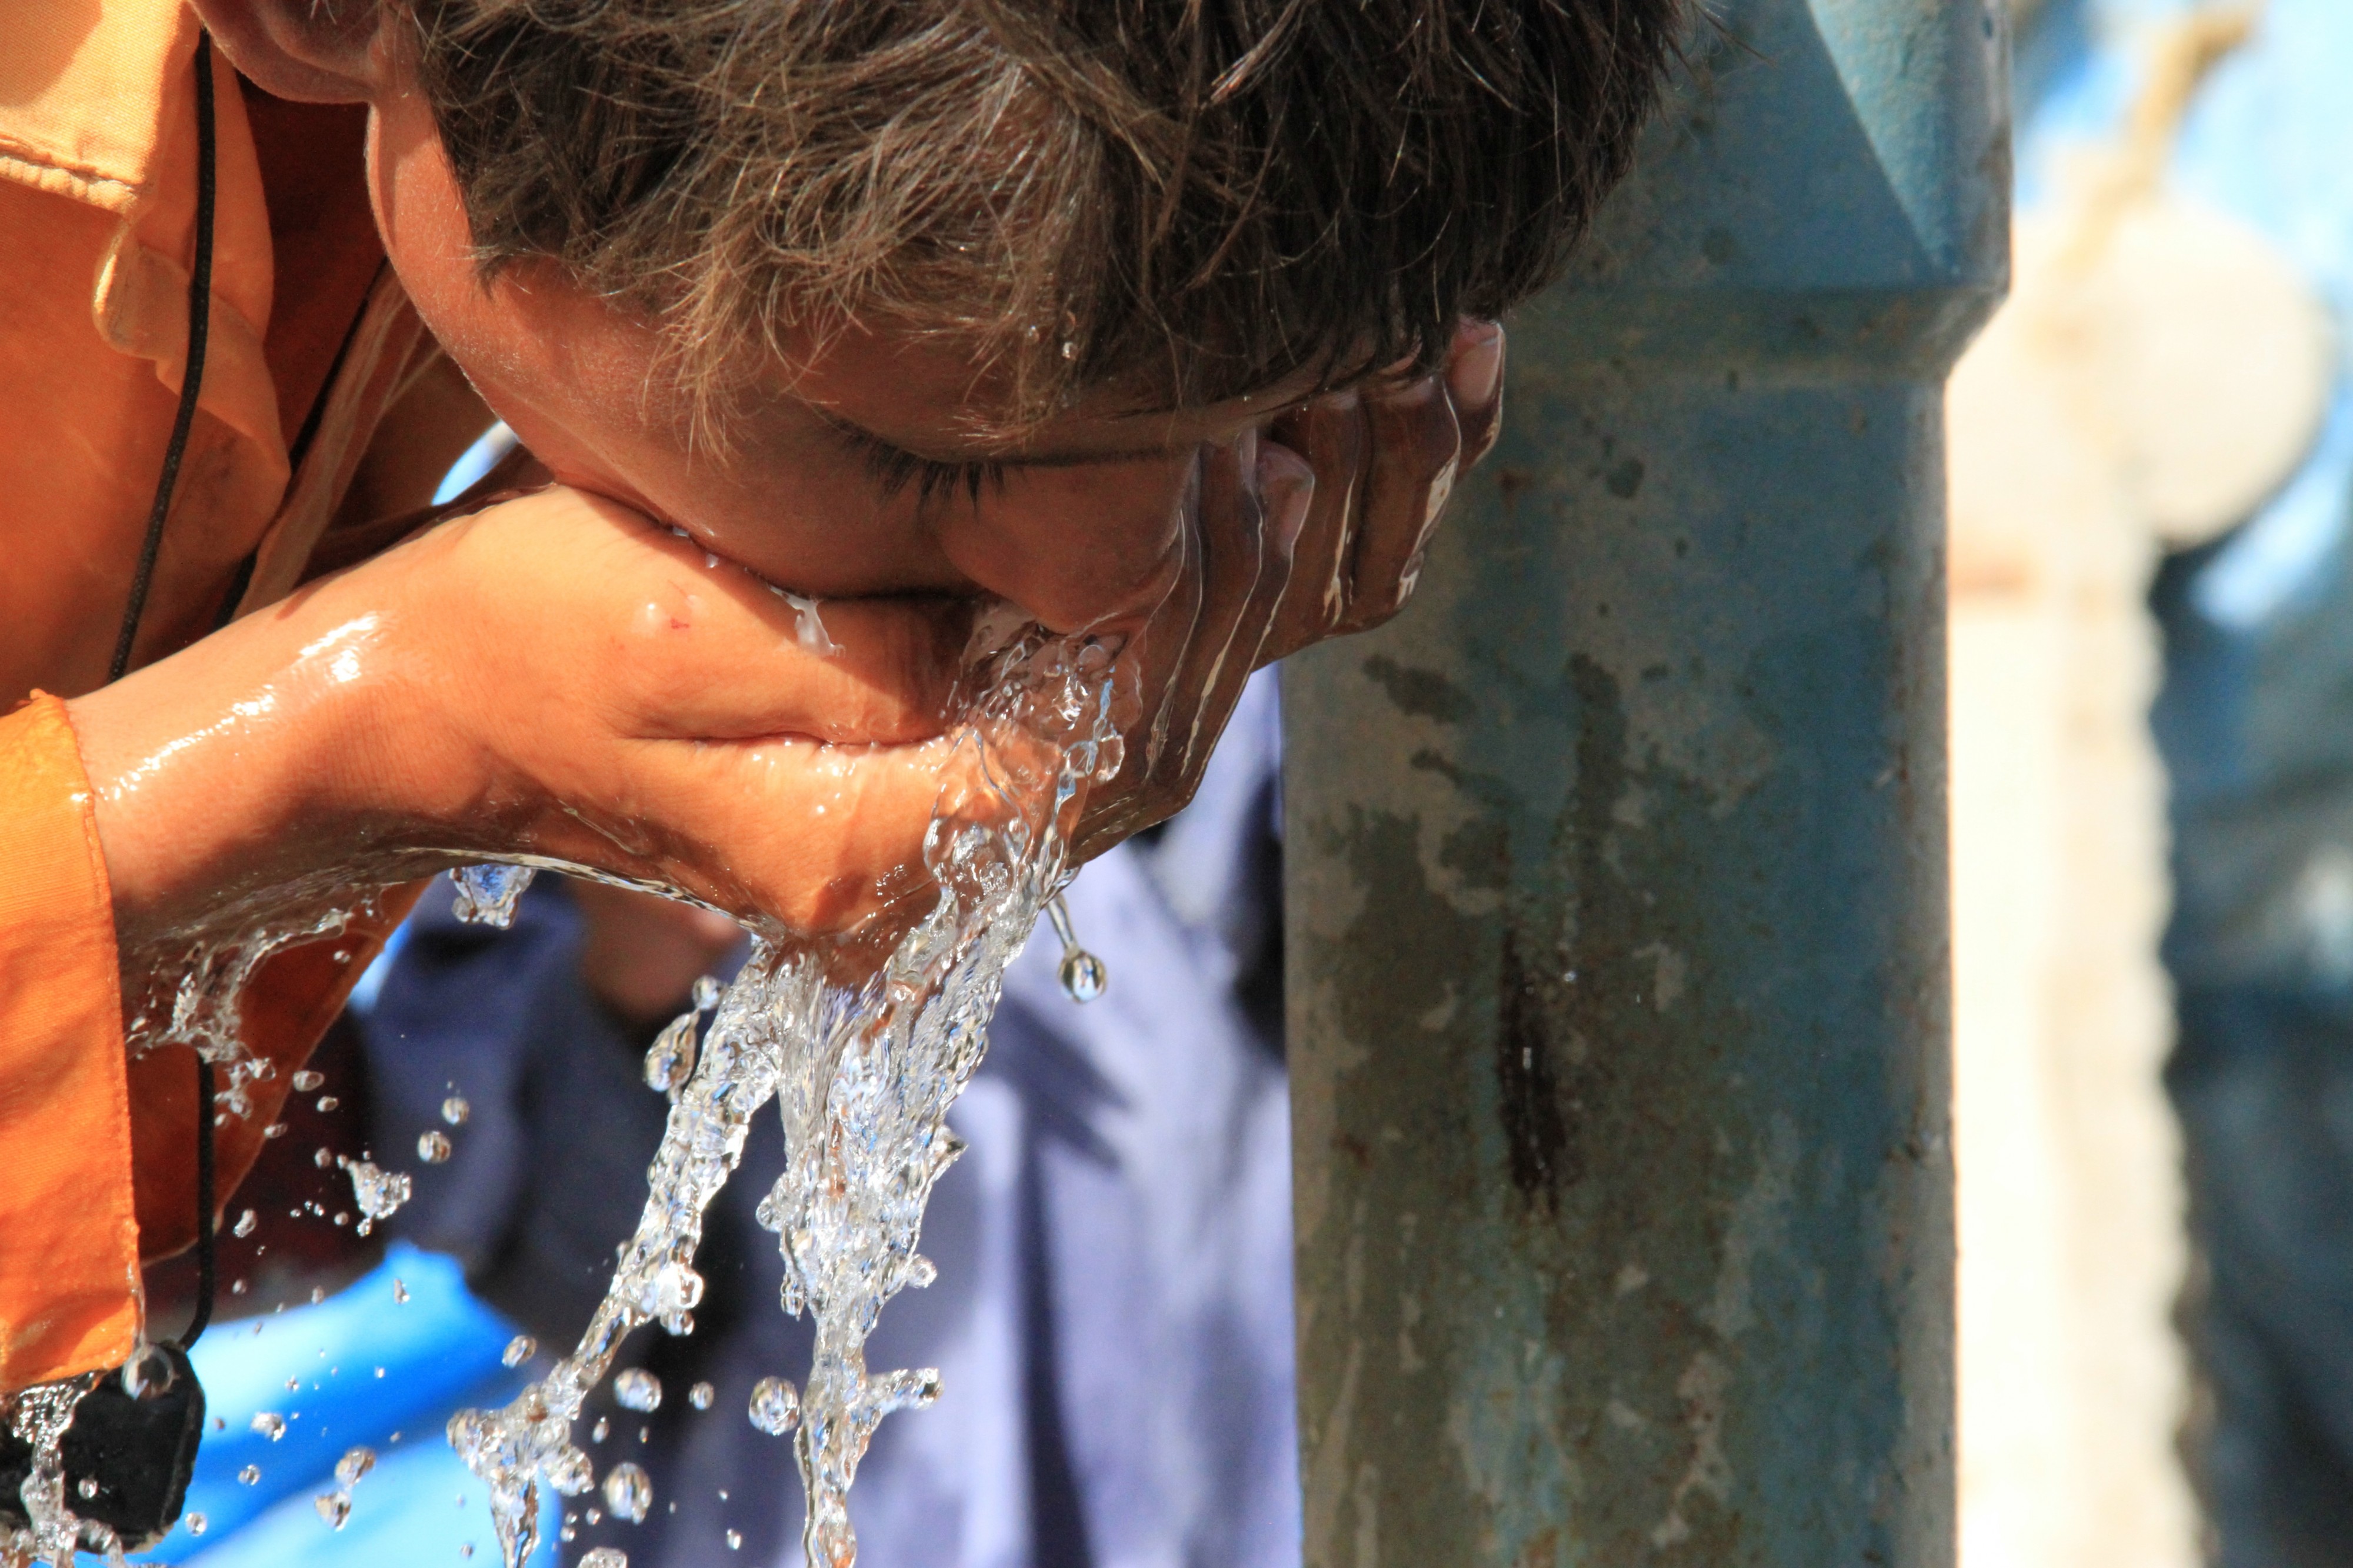 Providing clean water to millions of people